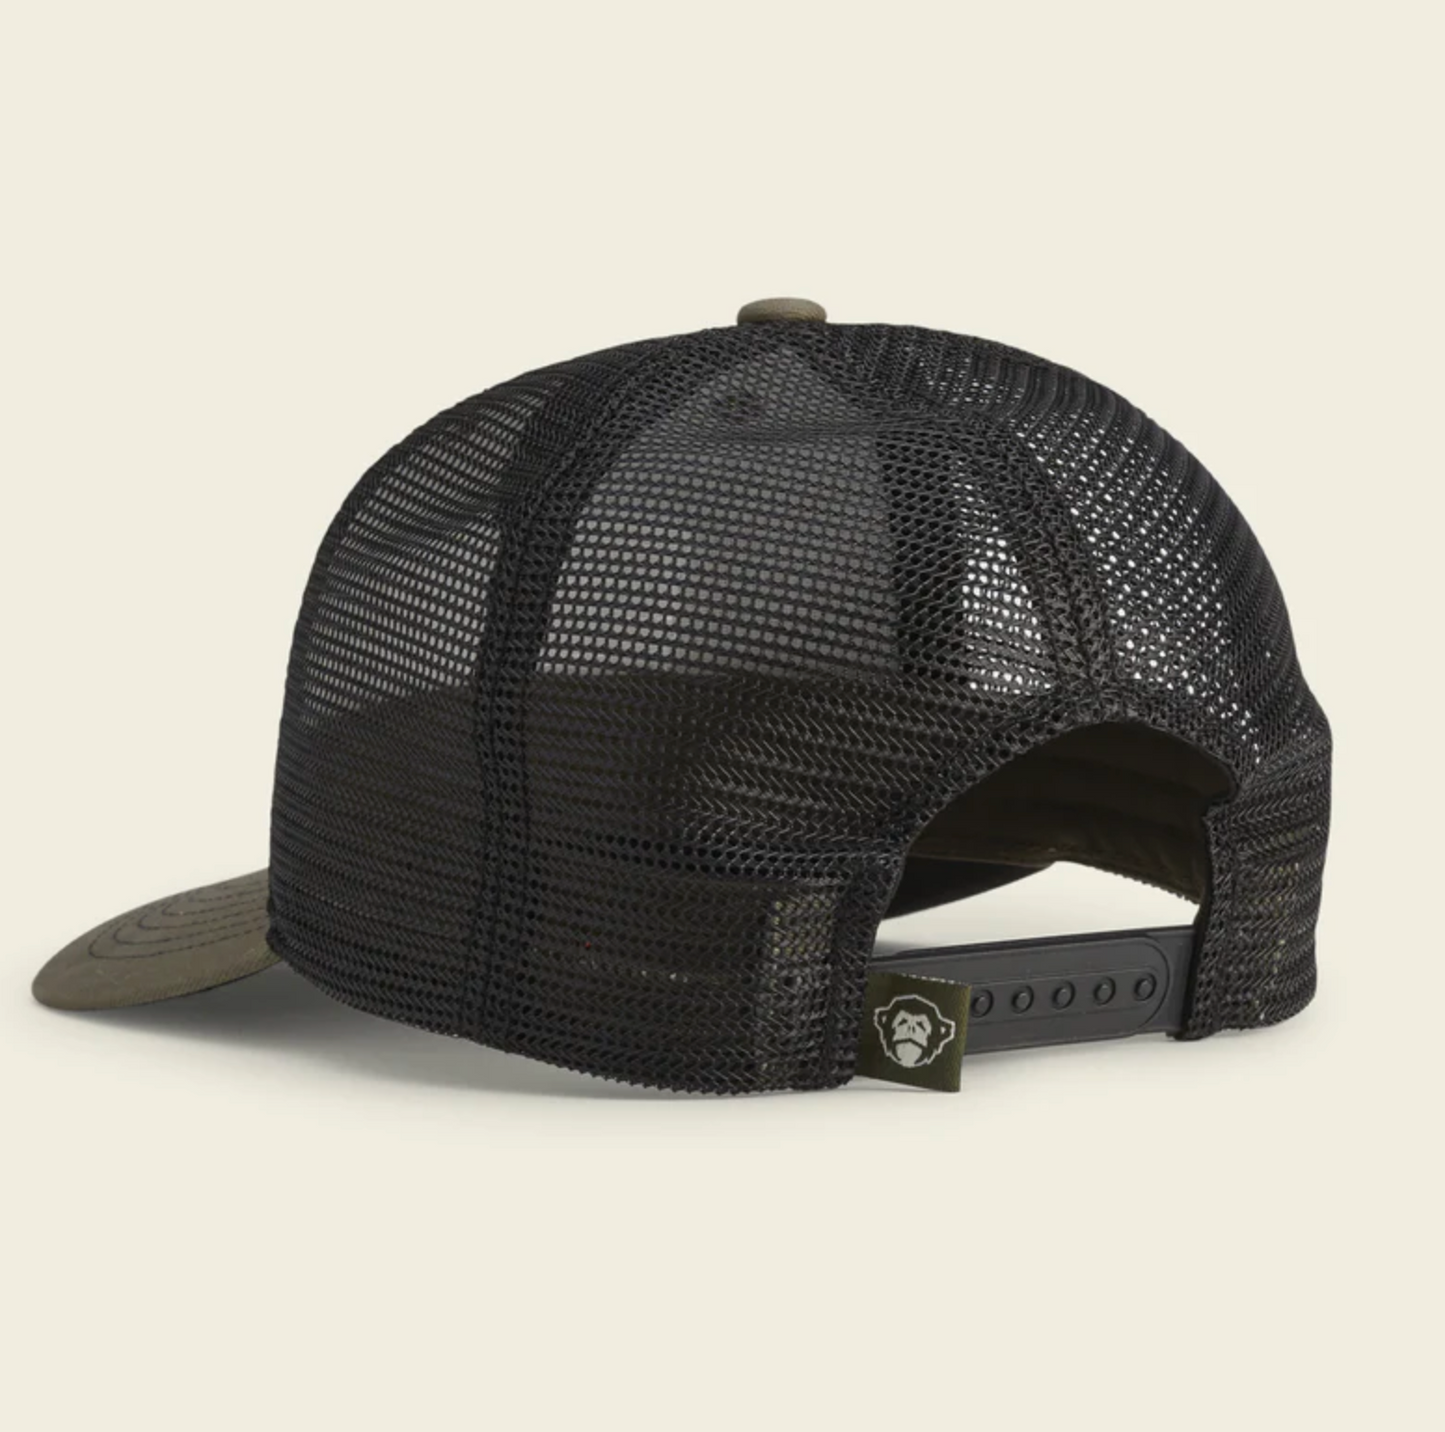 Howler Brothers Electric Stripe Snapback - Rifle Twill